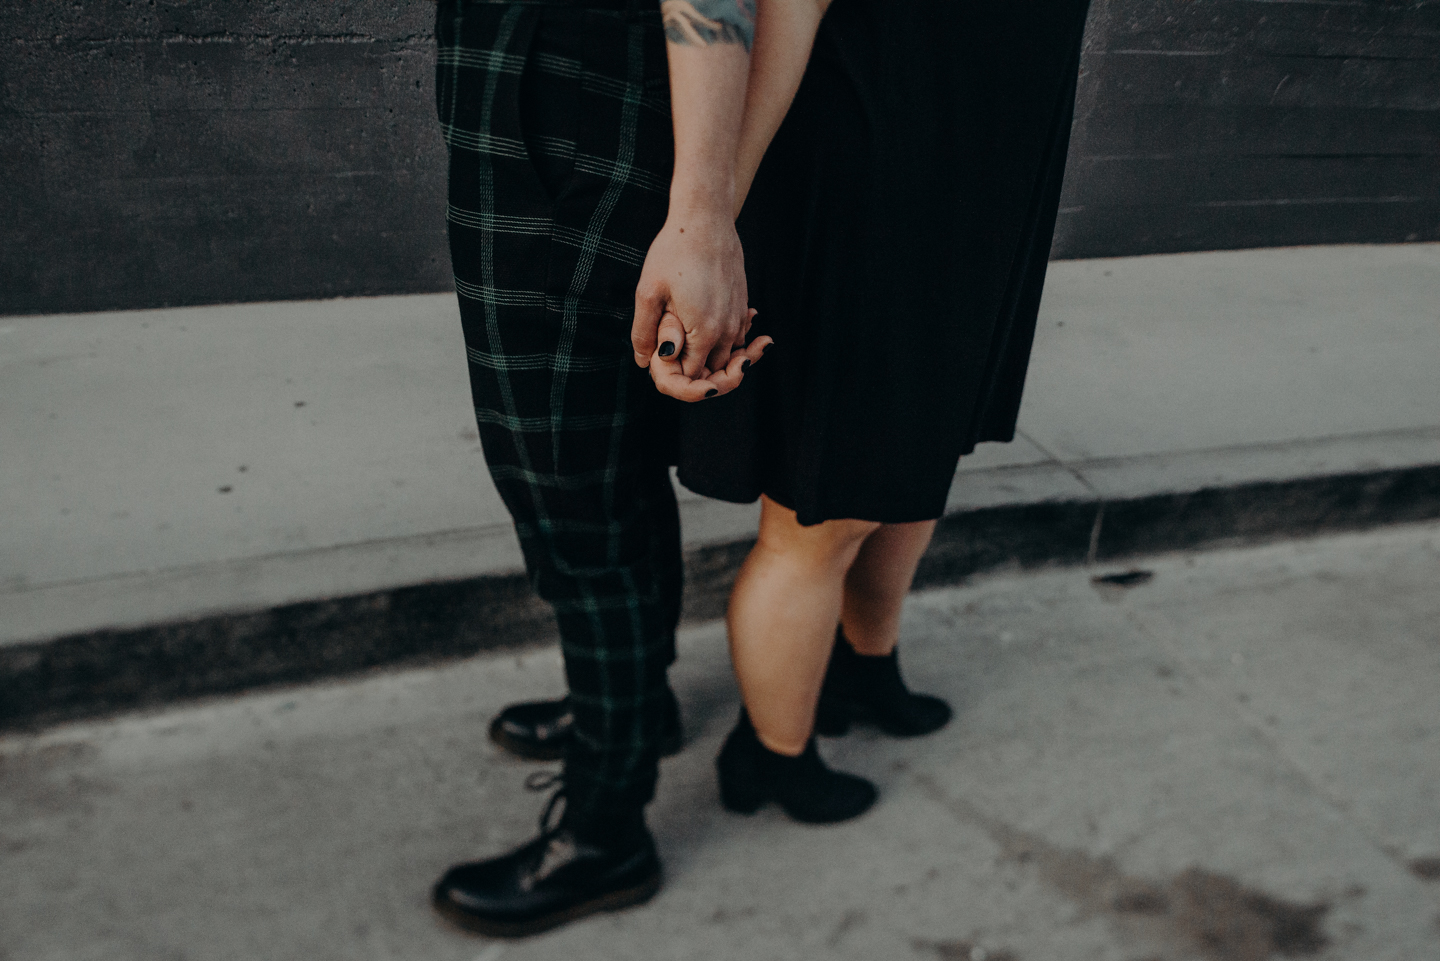 queer wedding photographer in los angeles - lesbian engagement session los angeles - isaiahandtaylor.com-034.jpg